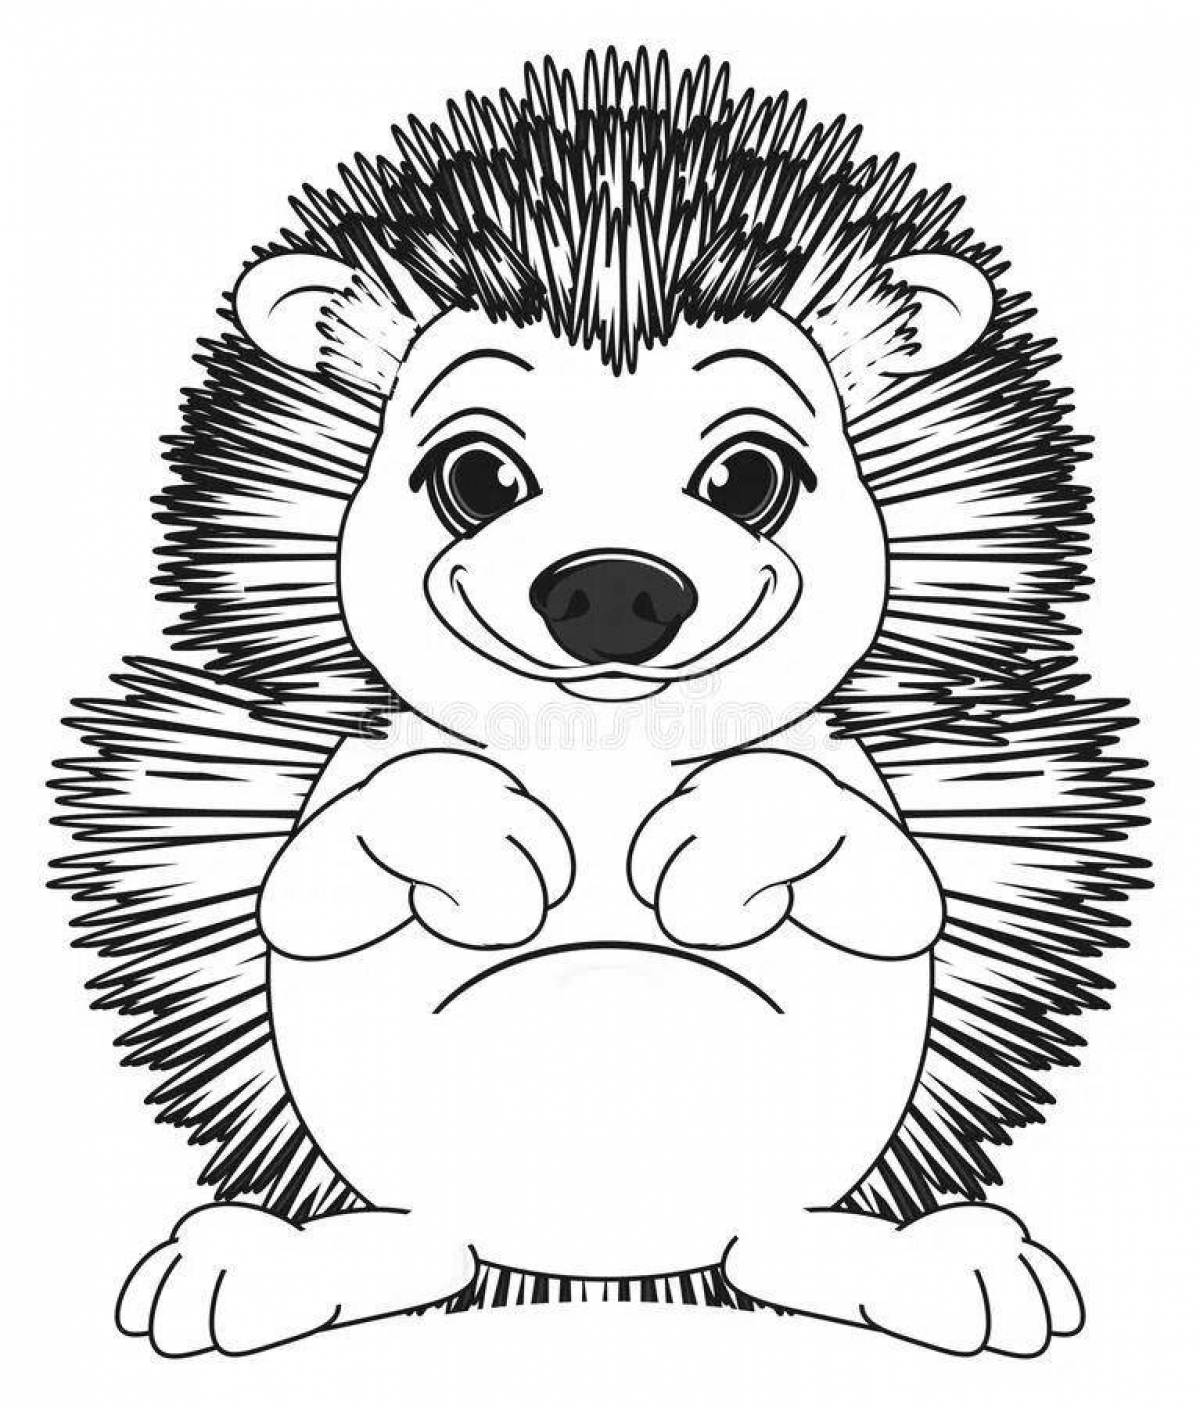 Coloring page adorable and adorable hedgehog